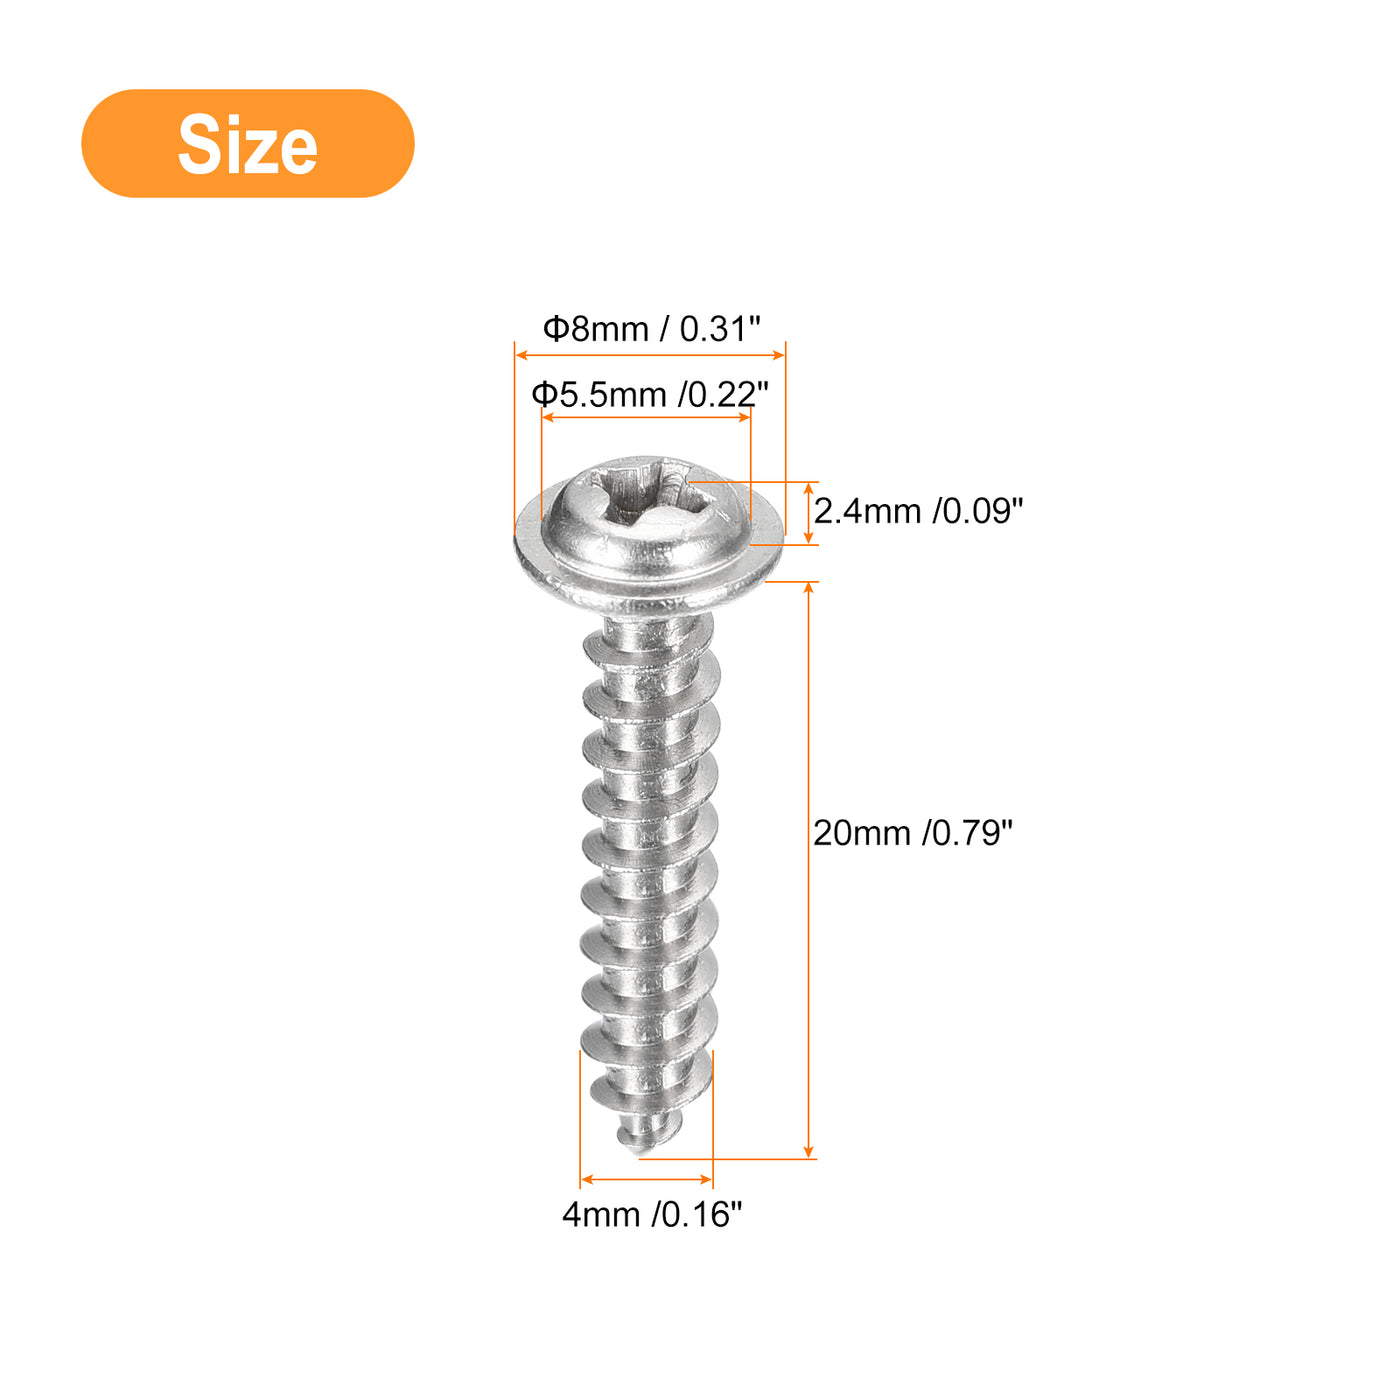 uxcell Uxcell ST4x20mm Phillips Pan Head Self-tapping Screw with Washer, 50pcs - 304 Stainless Steel Wood Screw Full Thread (Silver)